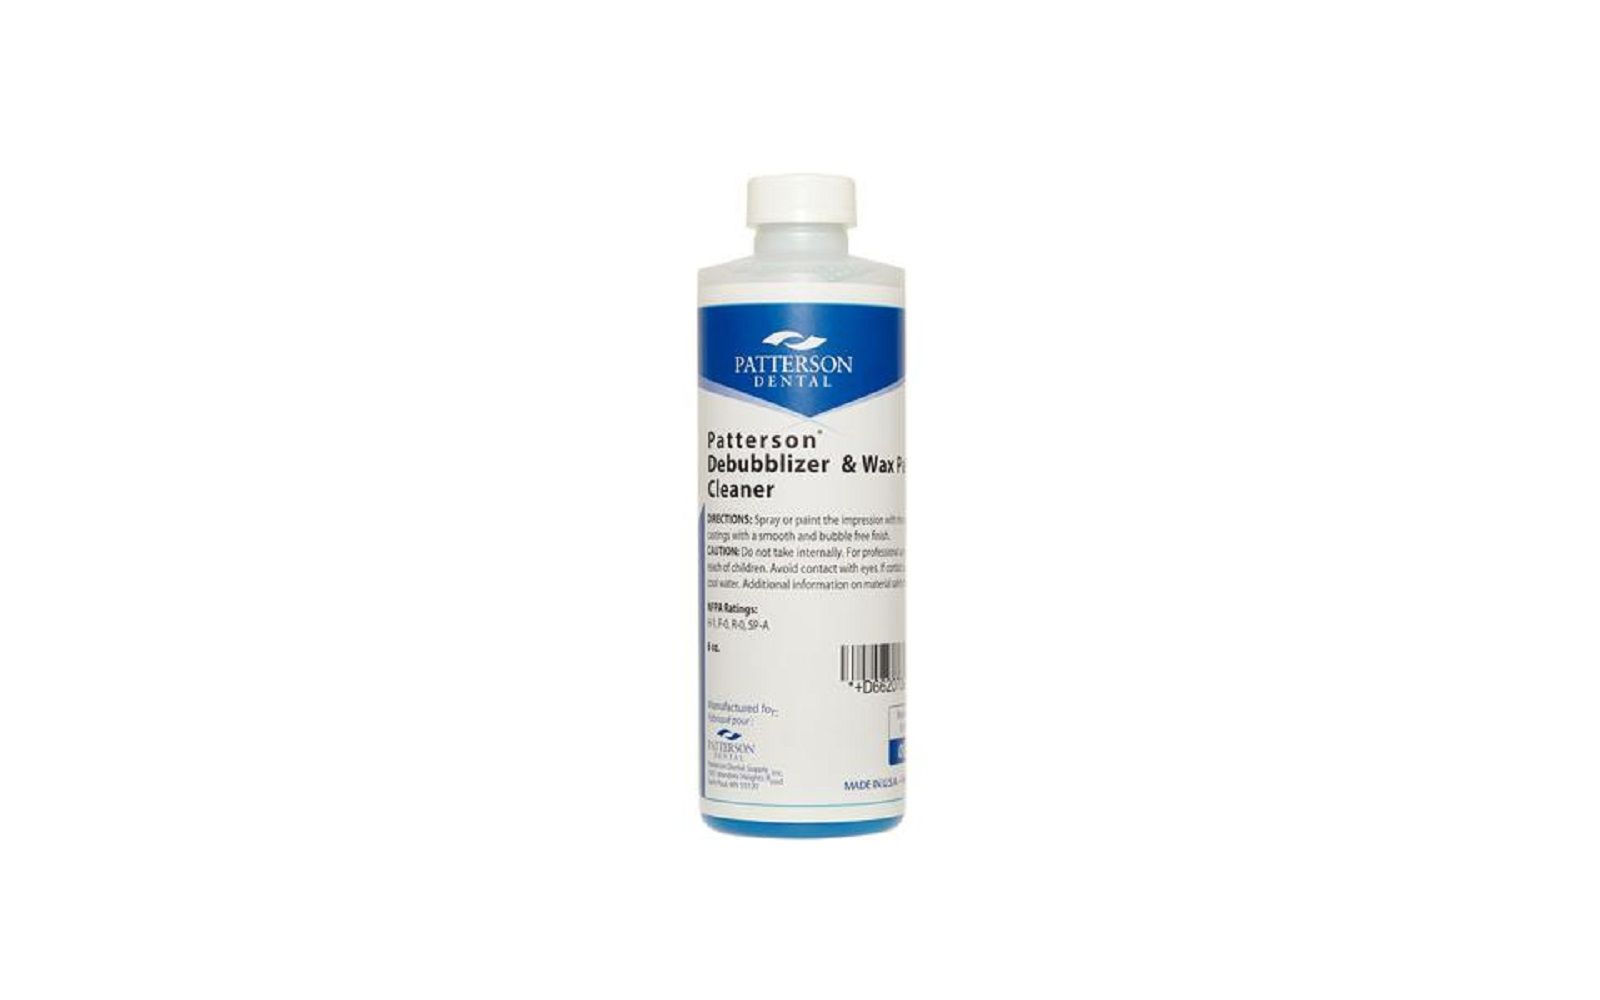 Patterson® debubblizer and wax pattern cleaner - patterson dental supply